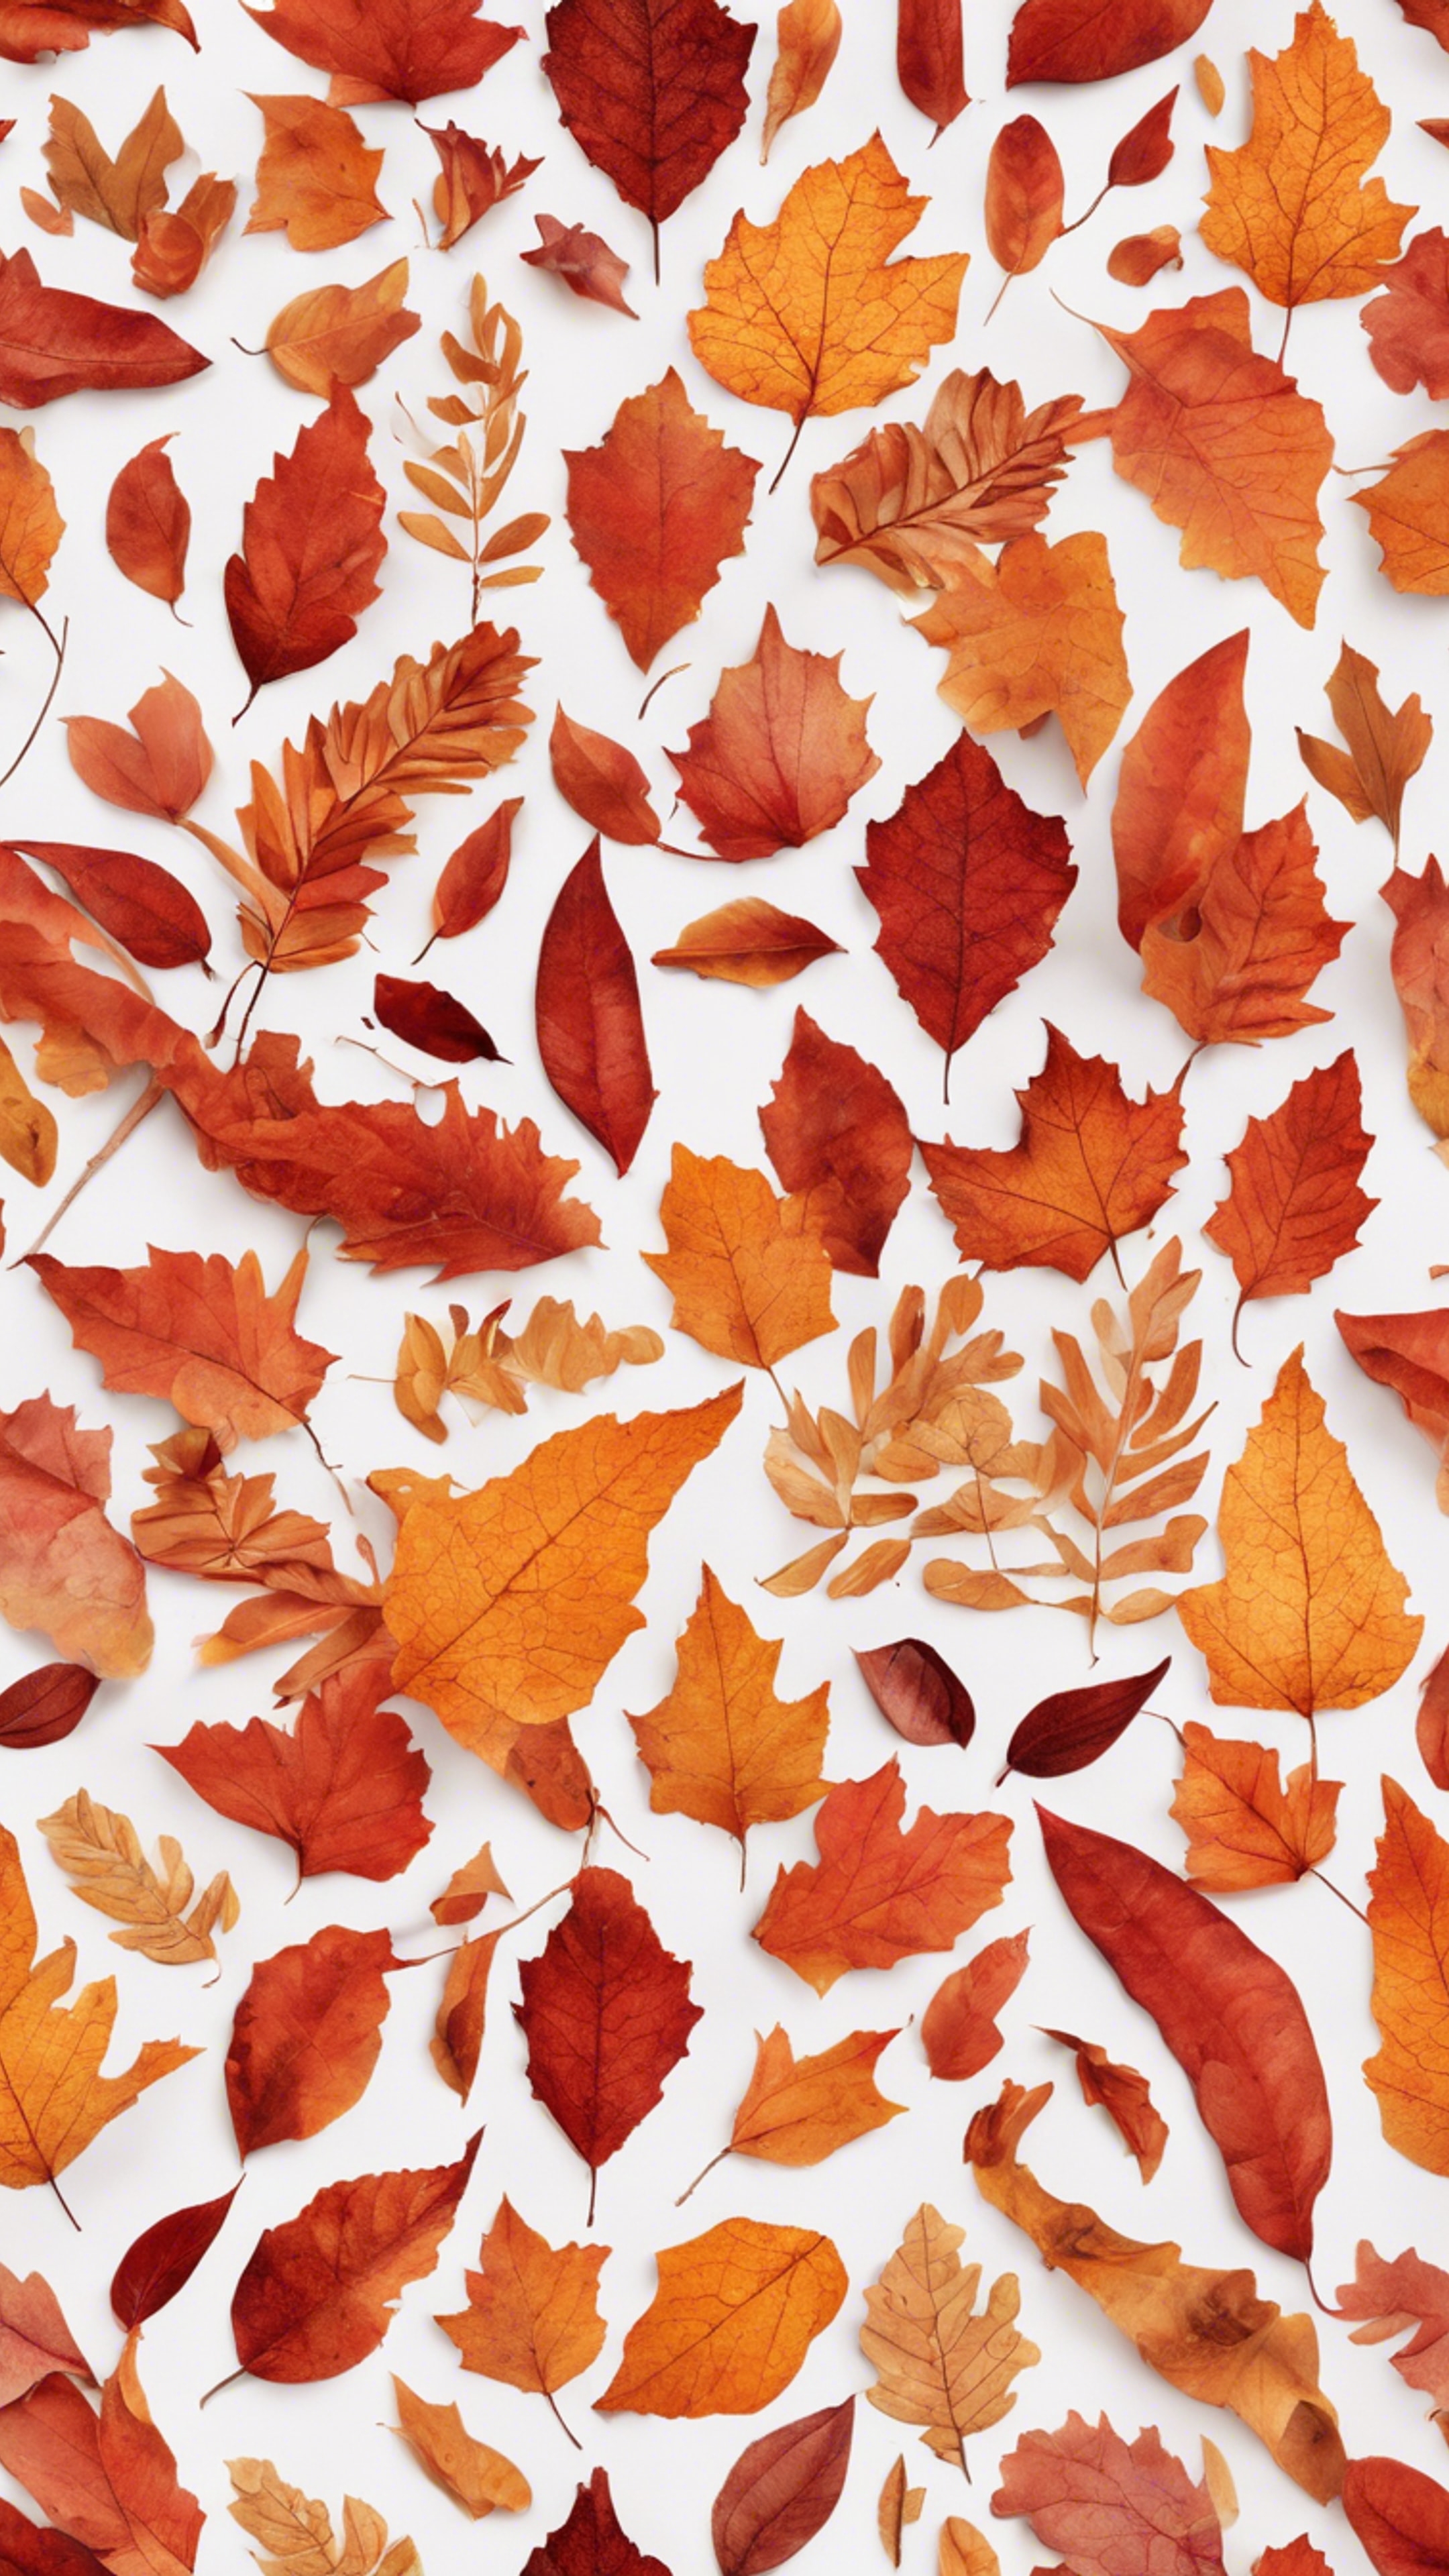 A fiery autumn pattern, reminiscent of falling leaves, in a seamless mix of red and orange. Wallpaper[40781a28d8554bd2886e]